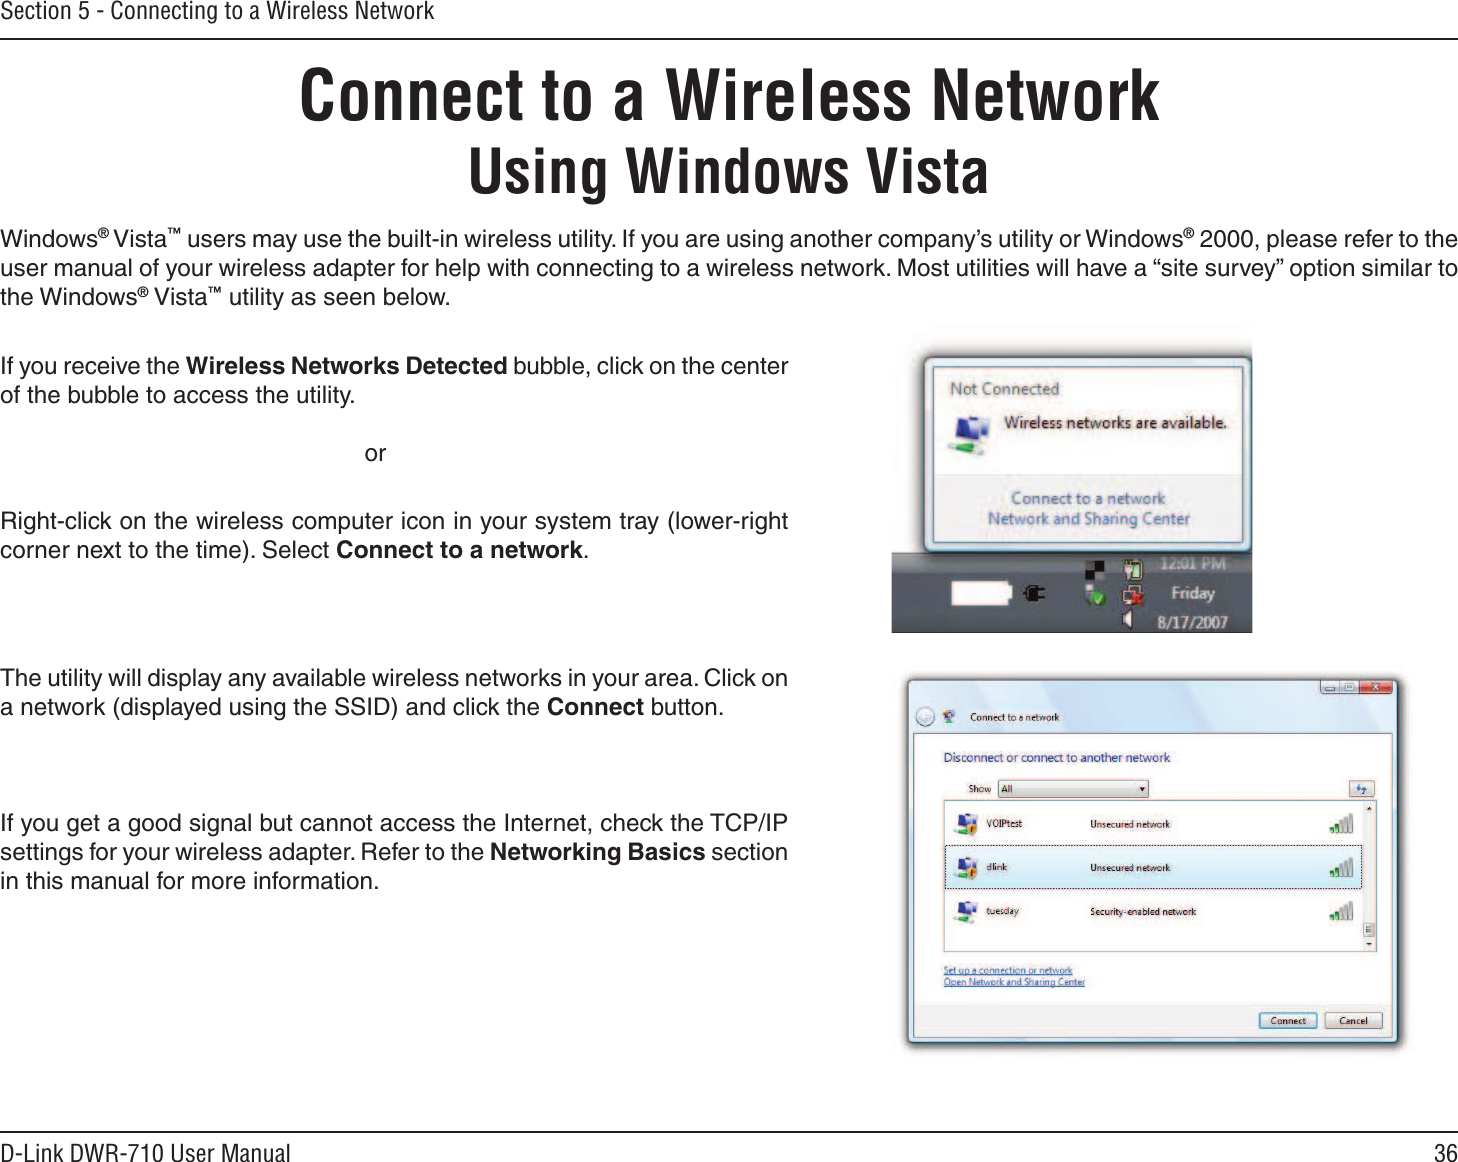 36D-Link DWR-710 User ManualSection 5 - Connecting to a Wireless NetworkConnect to a Wireless NetworkUsing Windows VistaWindows® Vista™ users may use the built-in wireless utility. If you are using another company’s utility or Windows® 2000, please refer to the user manual of your wireless adapter for help with connecting to a wireless network. Most utilities will have a “site survey” option similar to the Windows® Vista™ utility as seen below.Right-click on the wireless computer icon in your system tray (lower-right corner next to the time). Select Connect to a network.If you receive the Wireless Networks Detected bubble, click on the center of the bubble to access the utility.     orThe utility will display any available wireless networks in your area. Click on a network (displayed using the SSID) and click the Connect button.If you get a good signal but cannot access the Internet, check the TCP/IP settings for your wireless adapter. Refer to the Networking Basics section in this manual for more information.